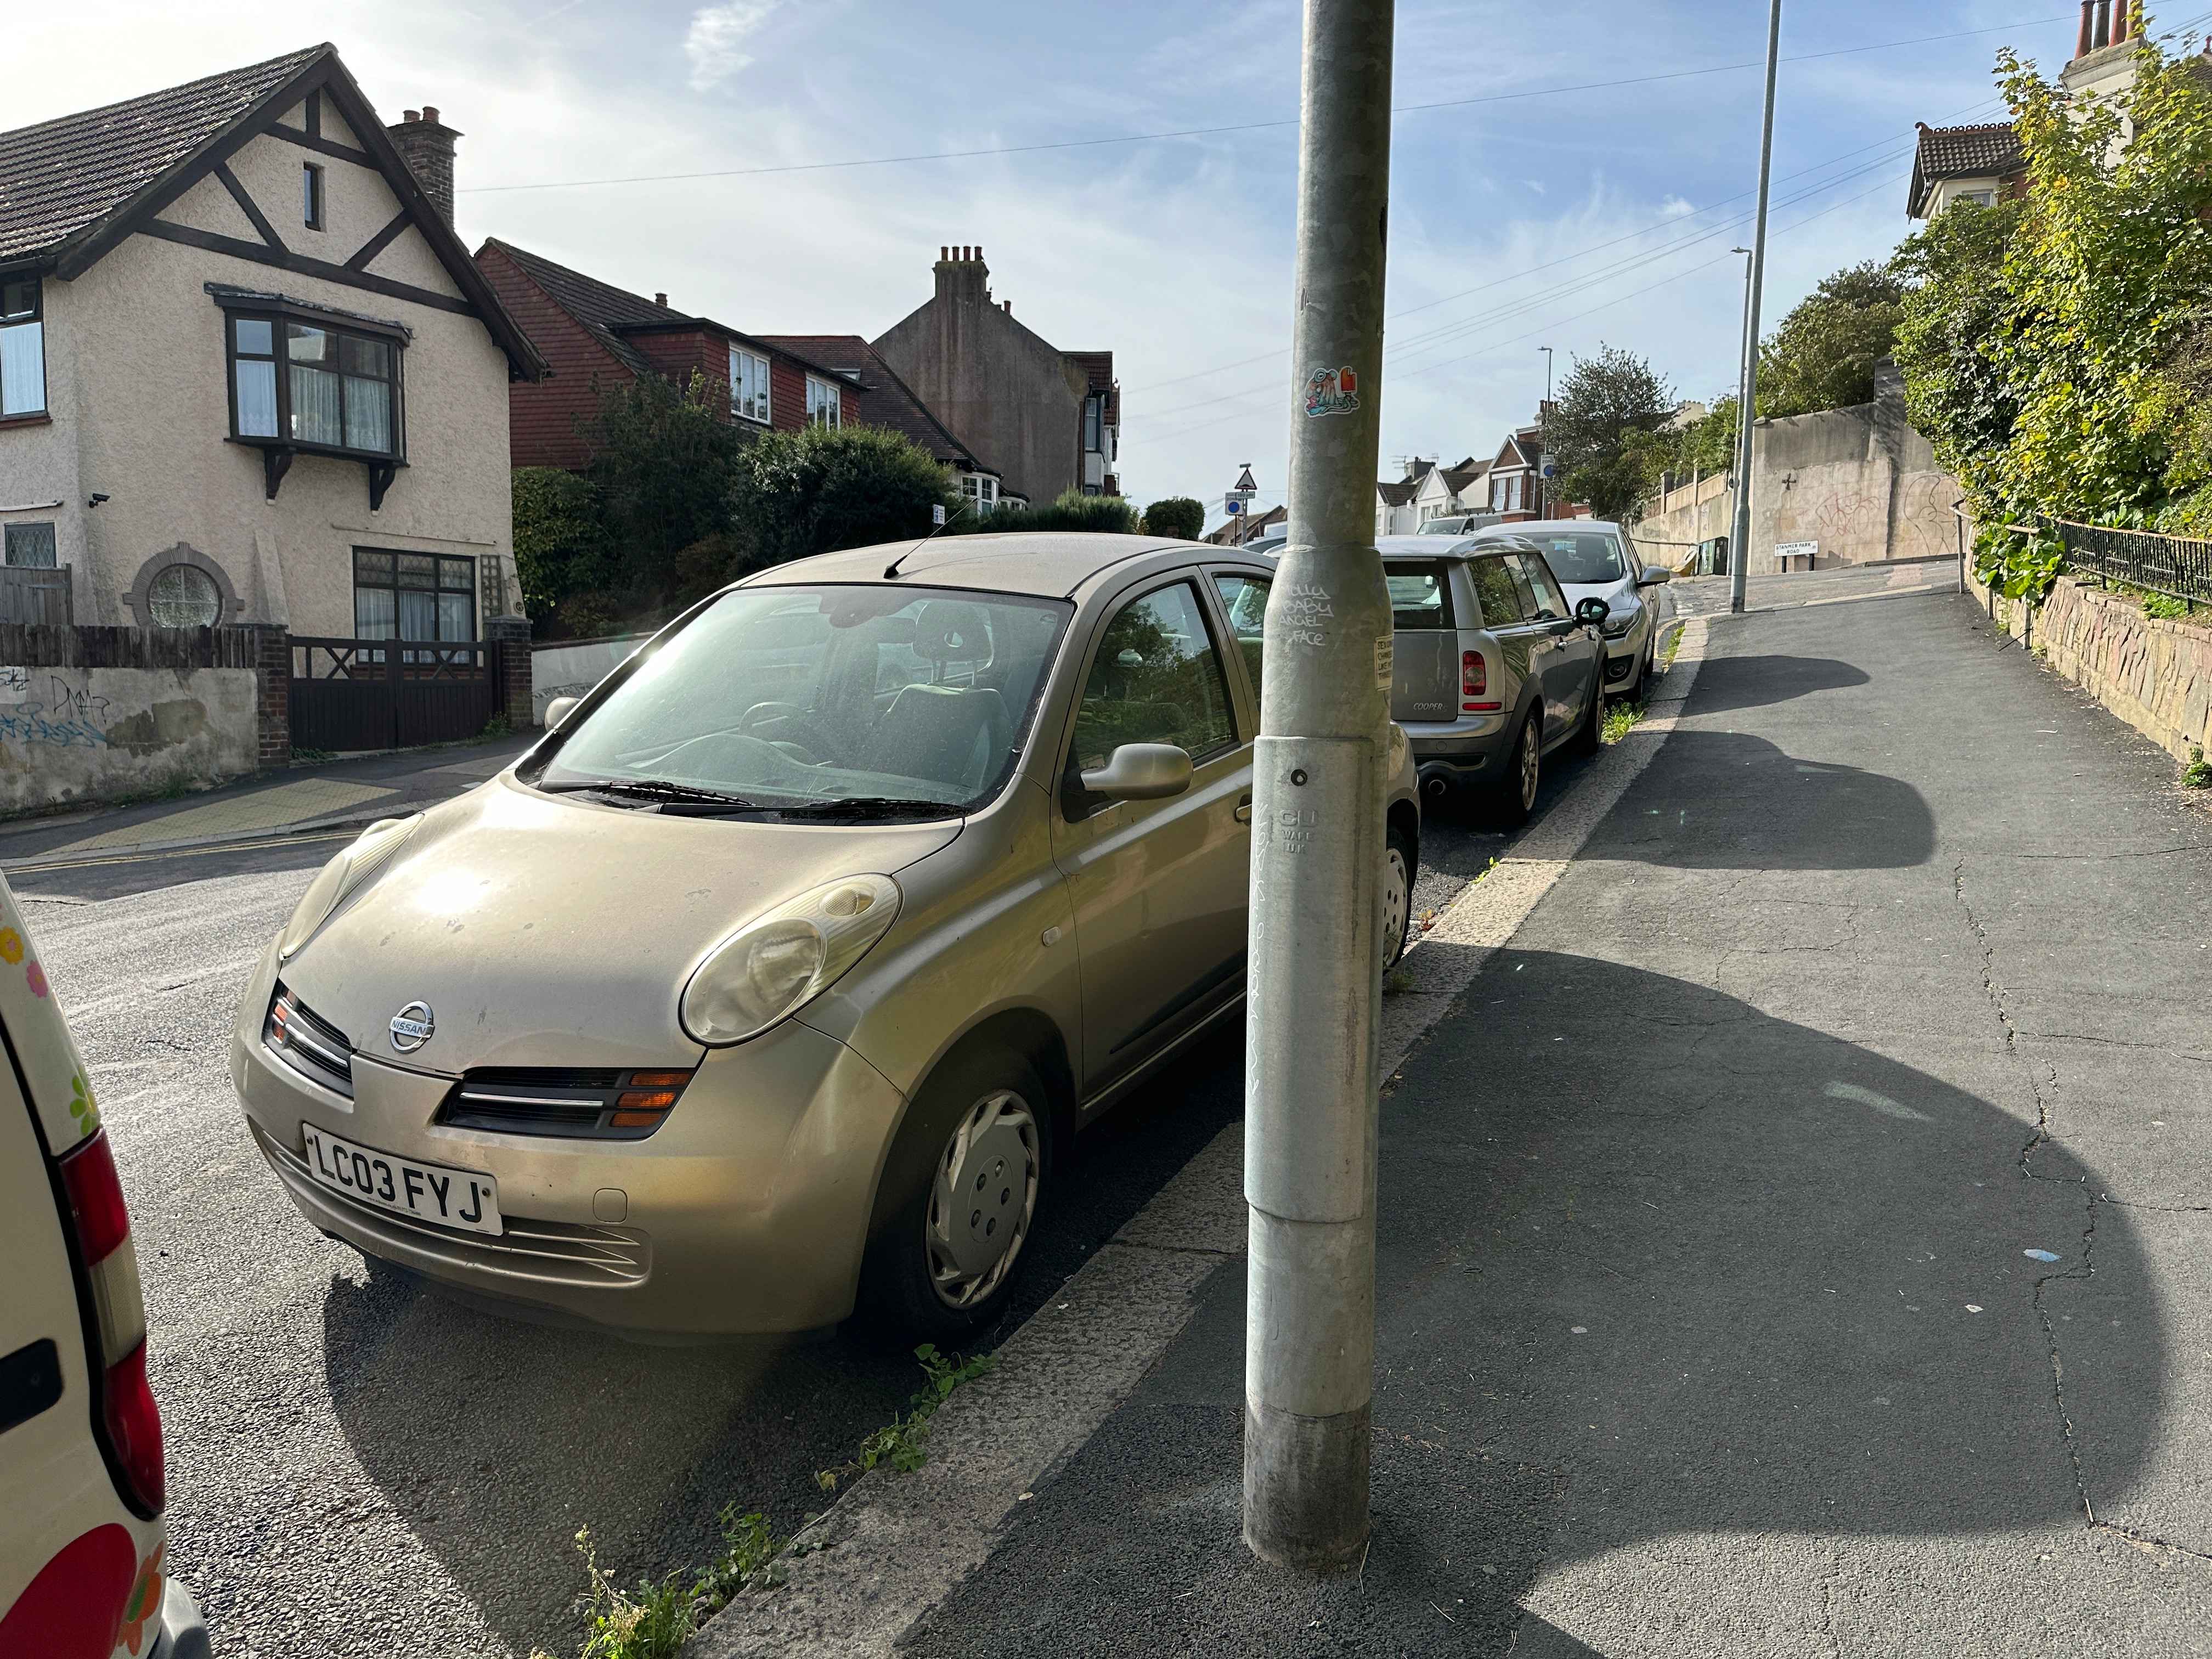 Photograph of LC03 FYJ - a Gold Nissan Micra parked in Hollingdean by a non-resident, and potentially abandoned. The sixth of seventeen photographs supplied by the residents of Hollingdean.